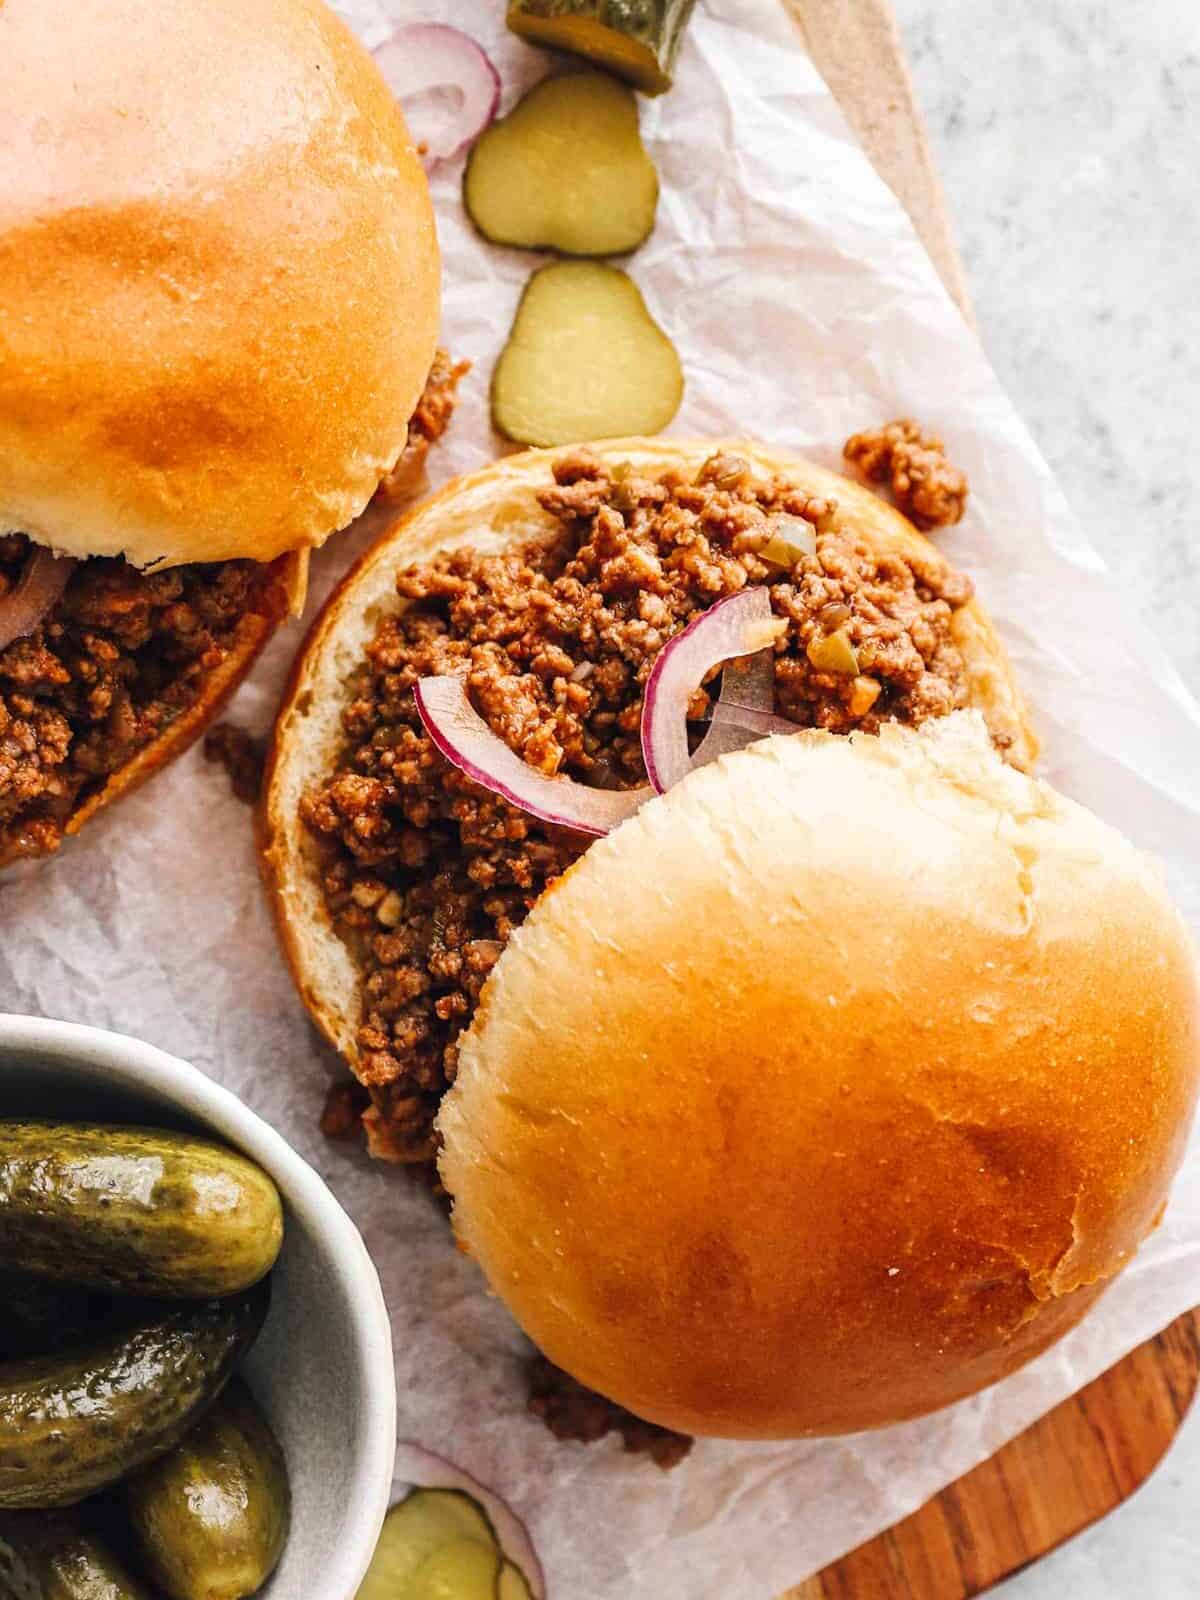 close up view of 2 sloppy joe sandwiches on a wooden cutting board with pickles.